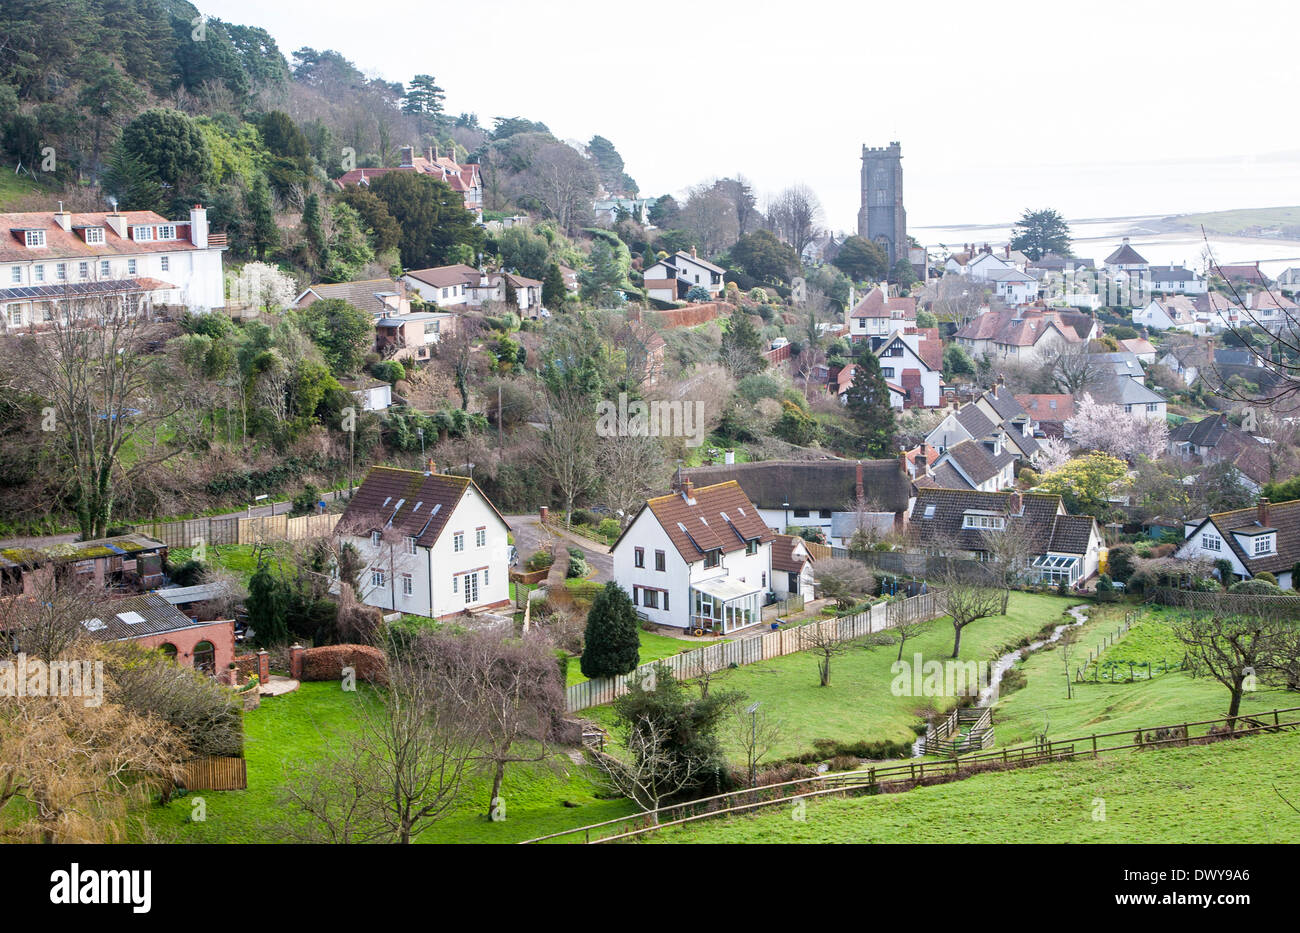 Morning view over houses in Minehead, Somerset, England Stock Photo